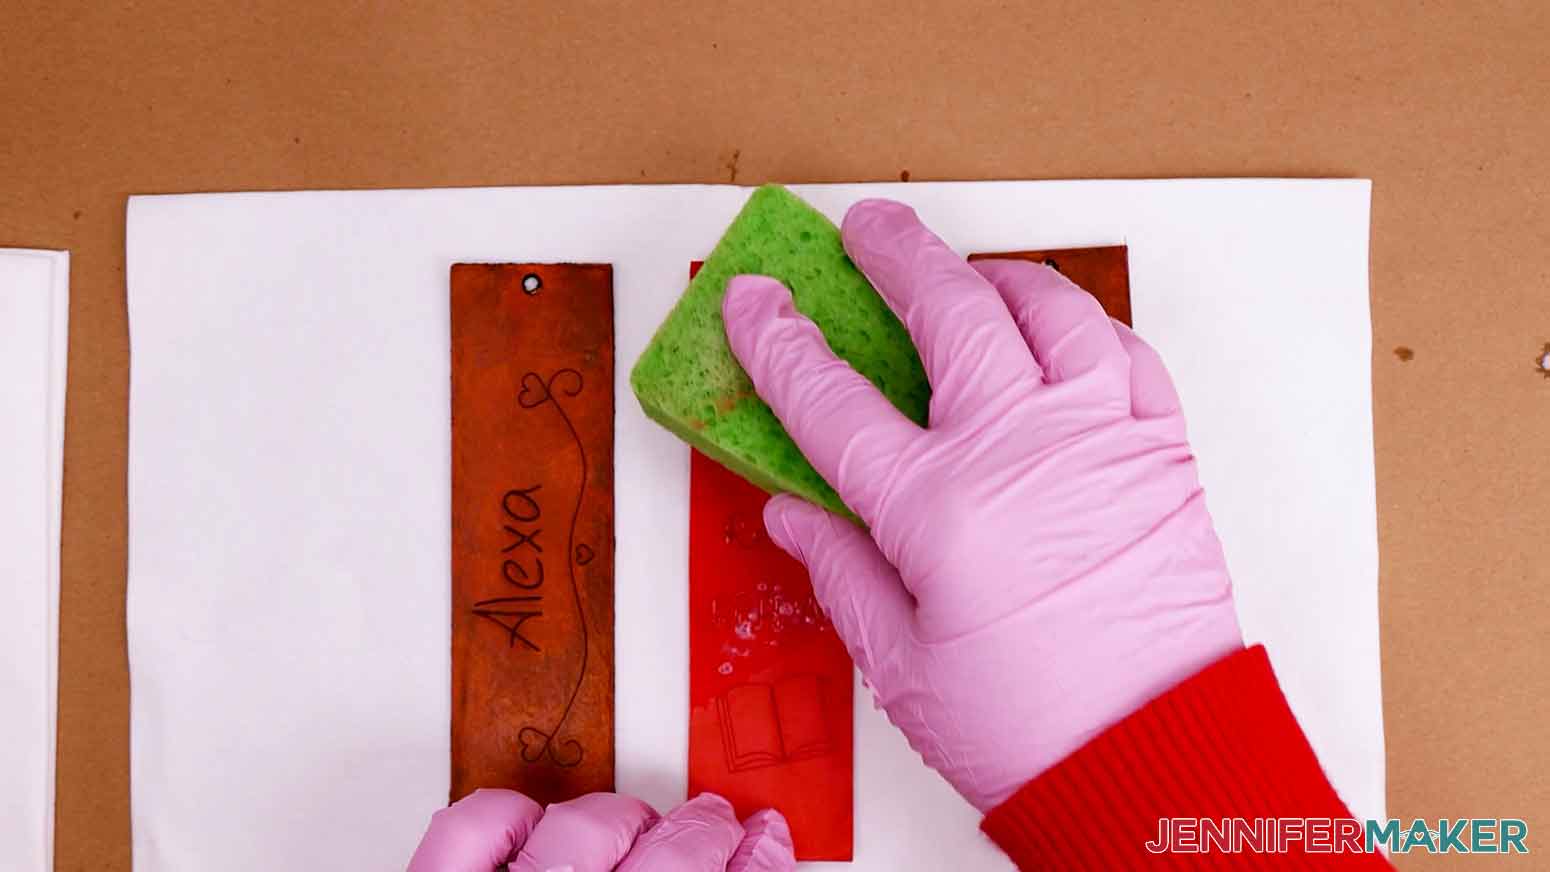 Use a kitchen sponge to apply leather finish to engraved bookmark.